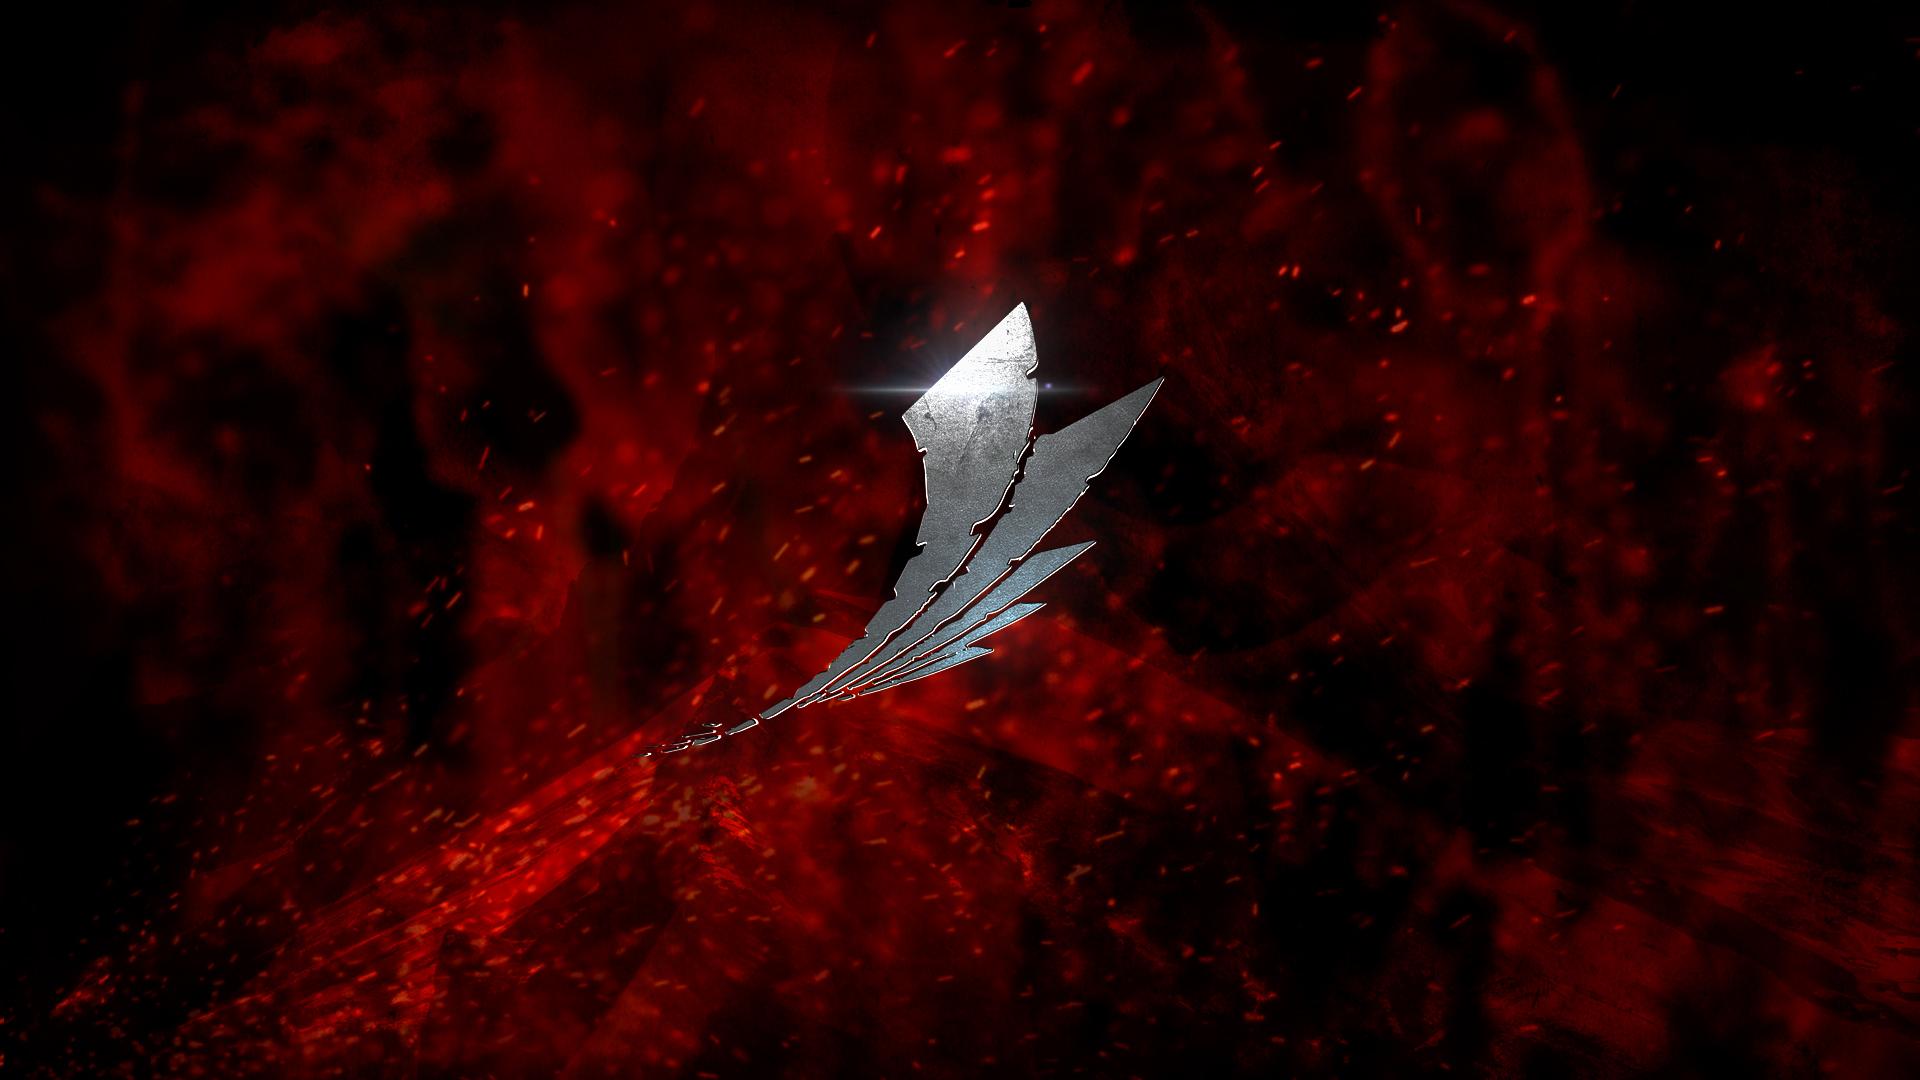 A Red Veil Wallpaper I Created For My Desktop Thought You Might